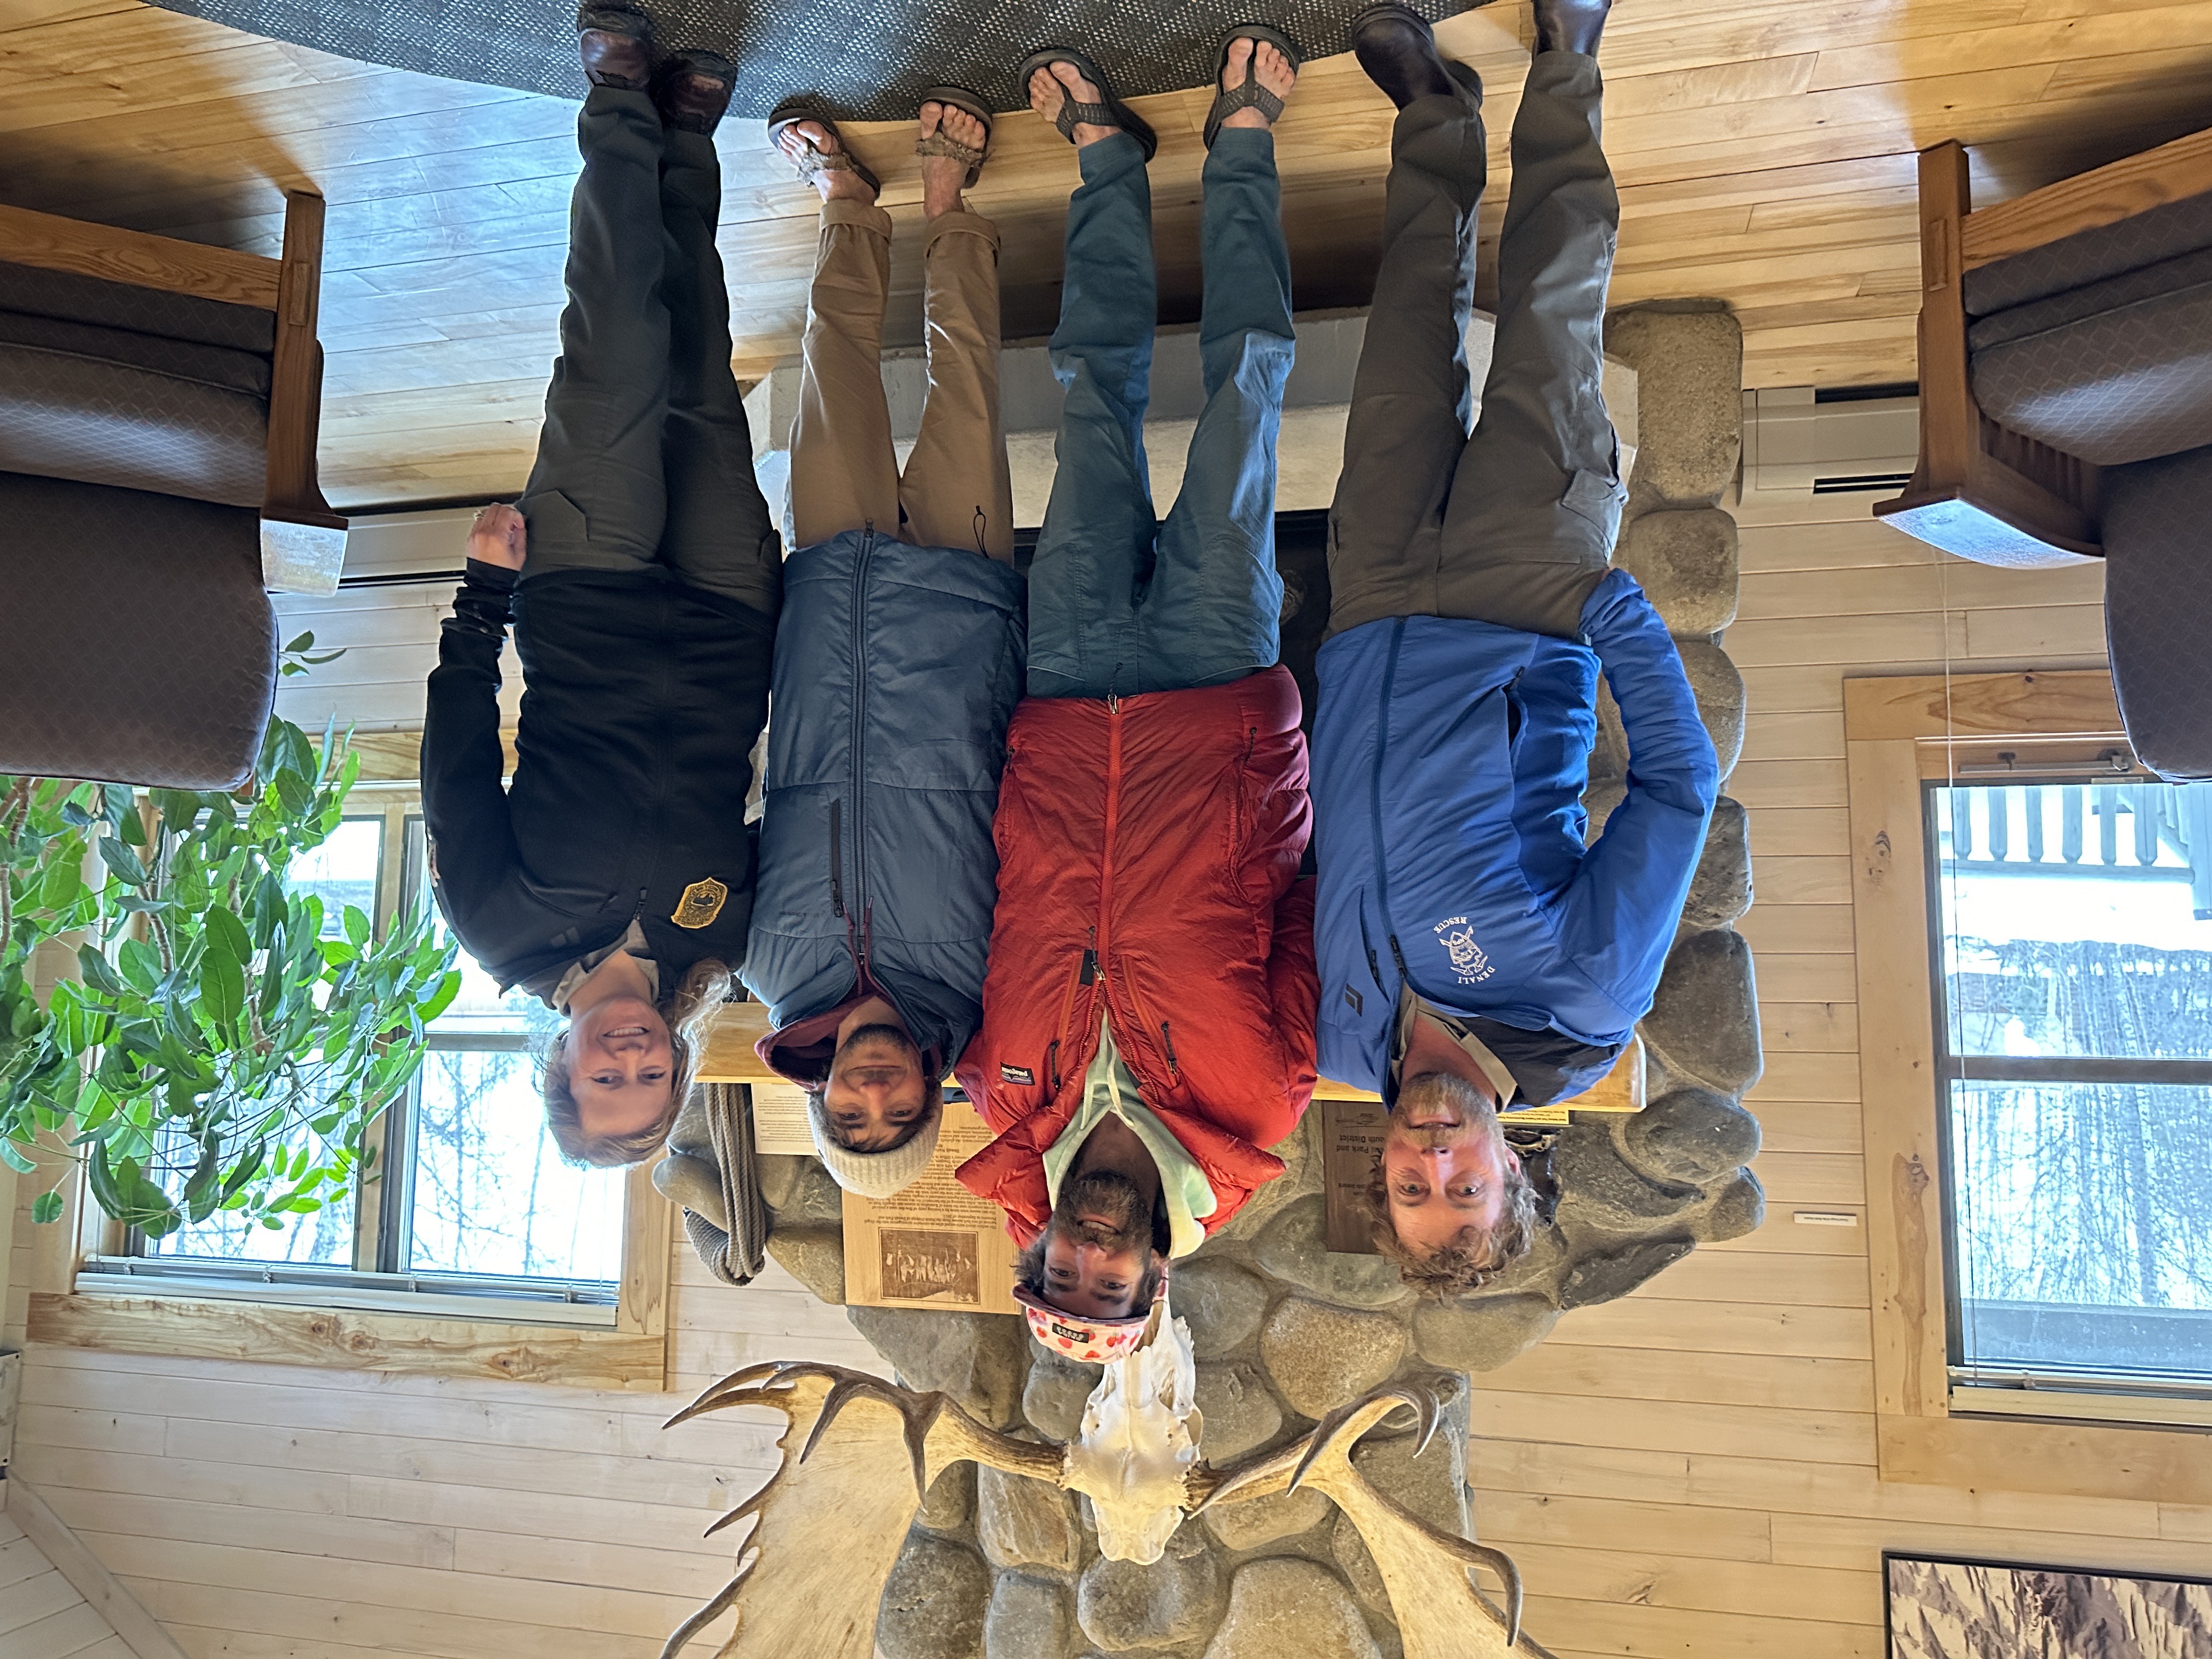 Two rangers and two climbers in puffy jackets and flip-flops pose in front of the ranger station fireplace